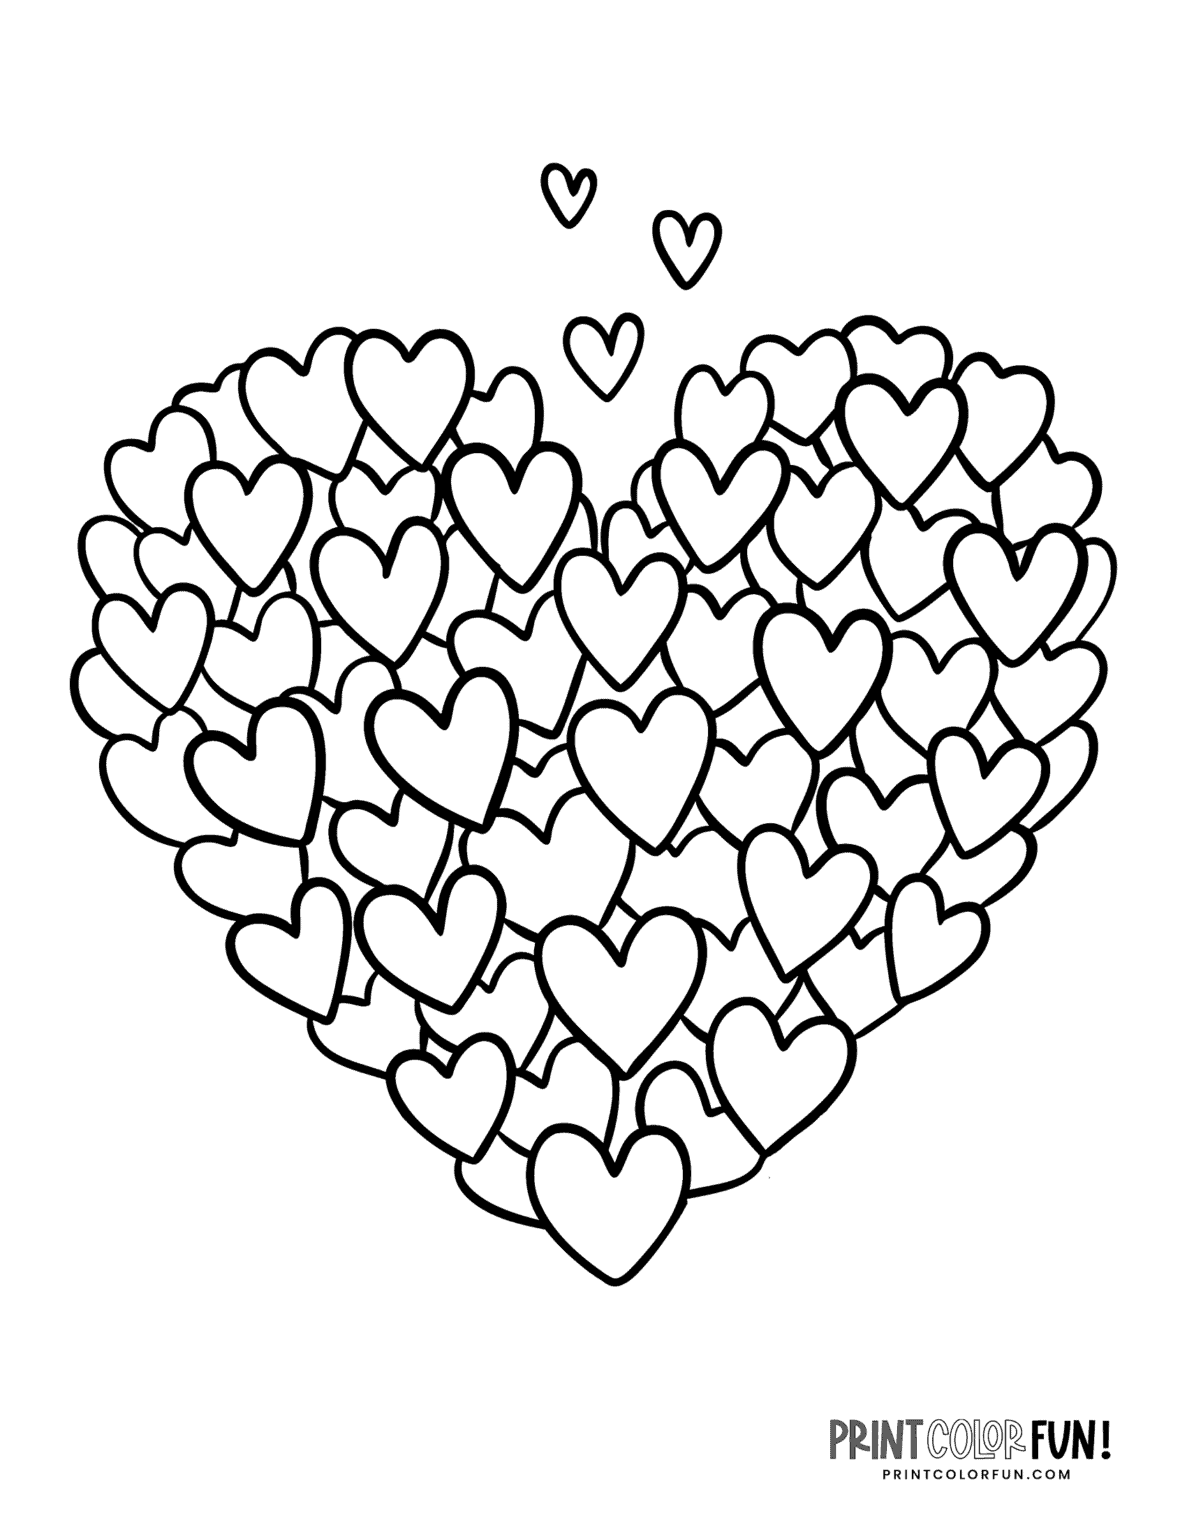 100-printable-heart-coloring-pages-a-huge-collection-of-hearts-for-coloring-crafting